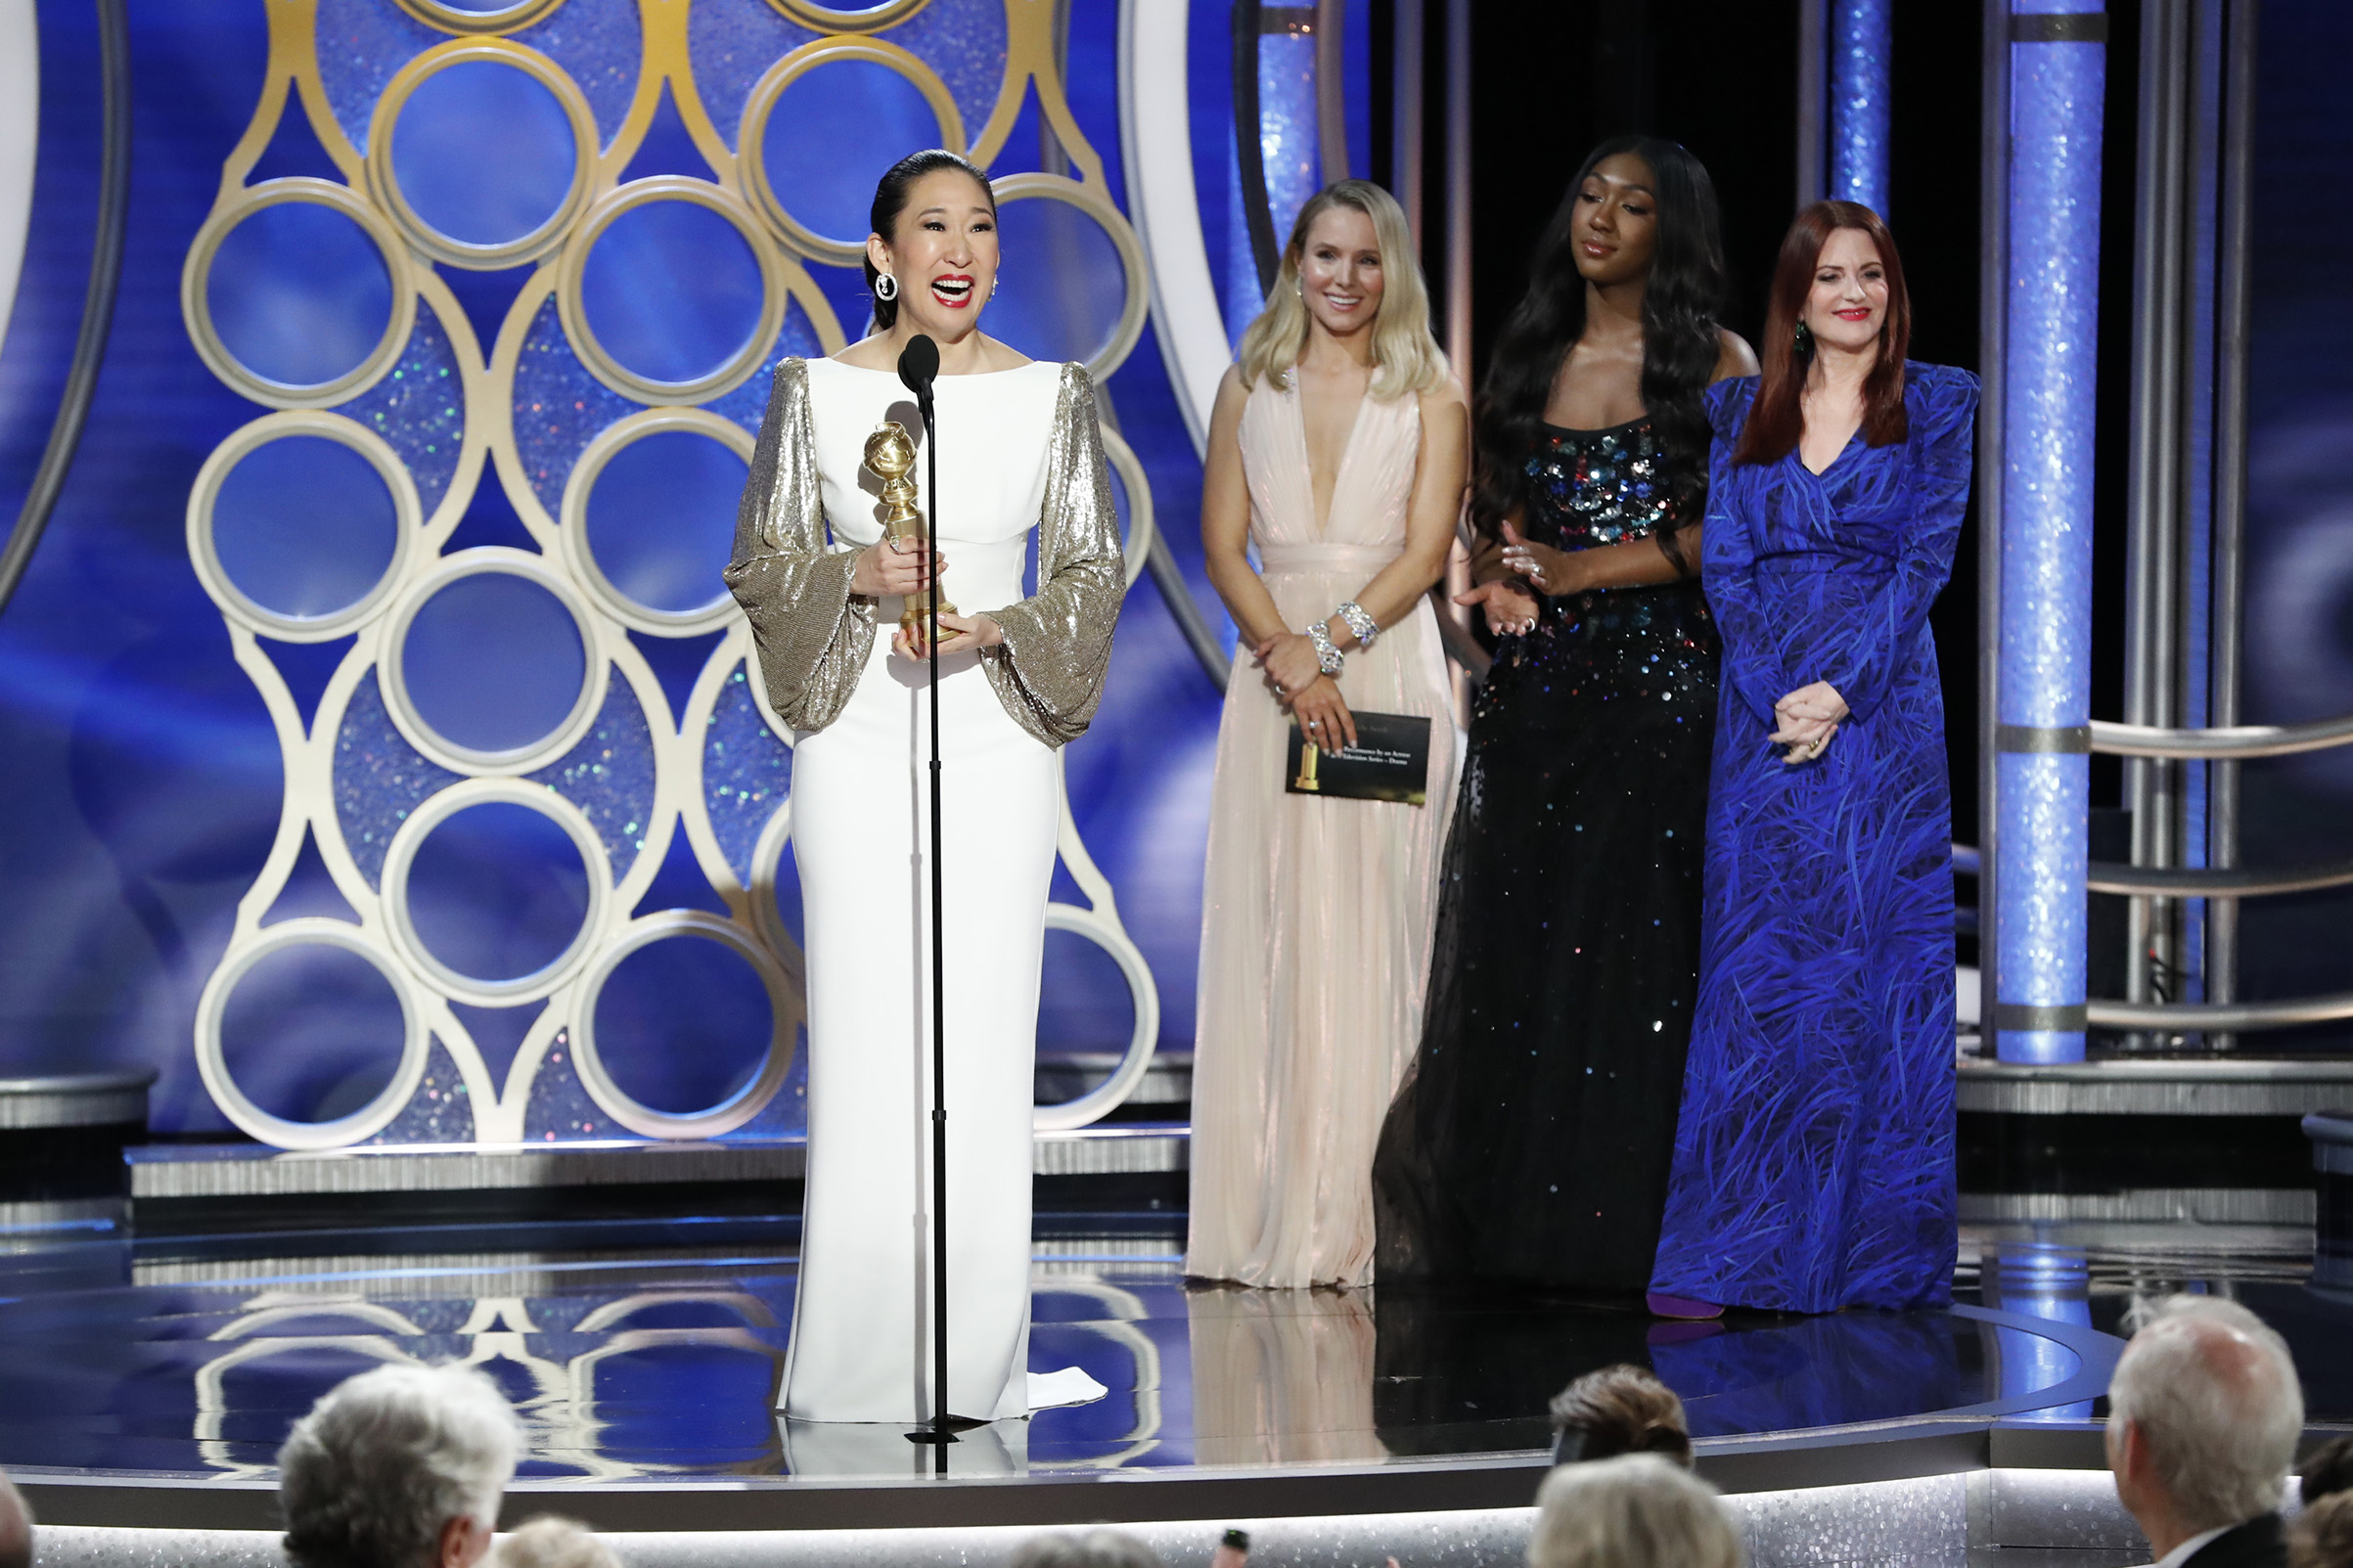 Sandra Oh from “Killing Eve” accept the Best Performance by an Actress in a Television Series – Drama award onstage during the 76th Annual Golden Globe Awards. (NBCUniversal/Getty Images)